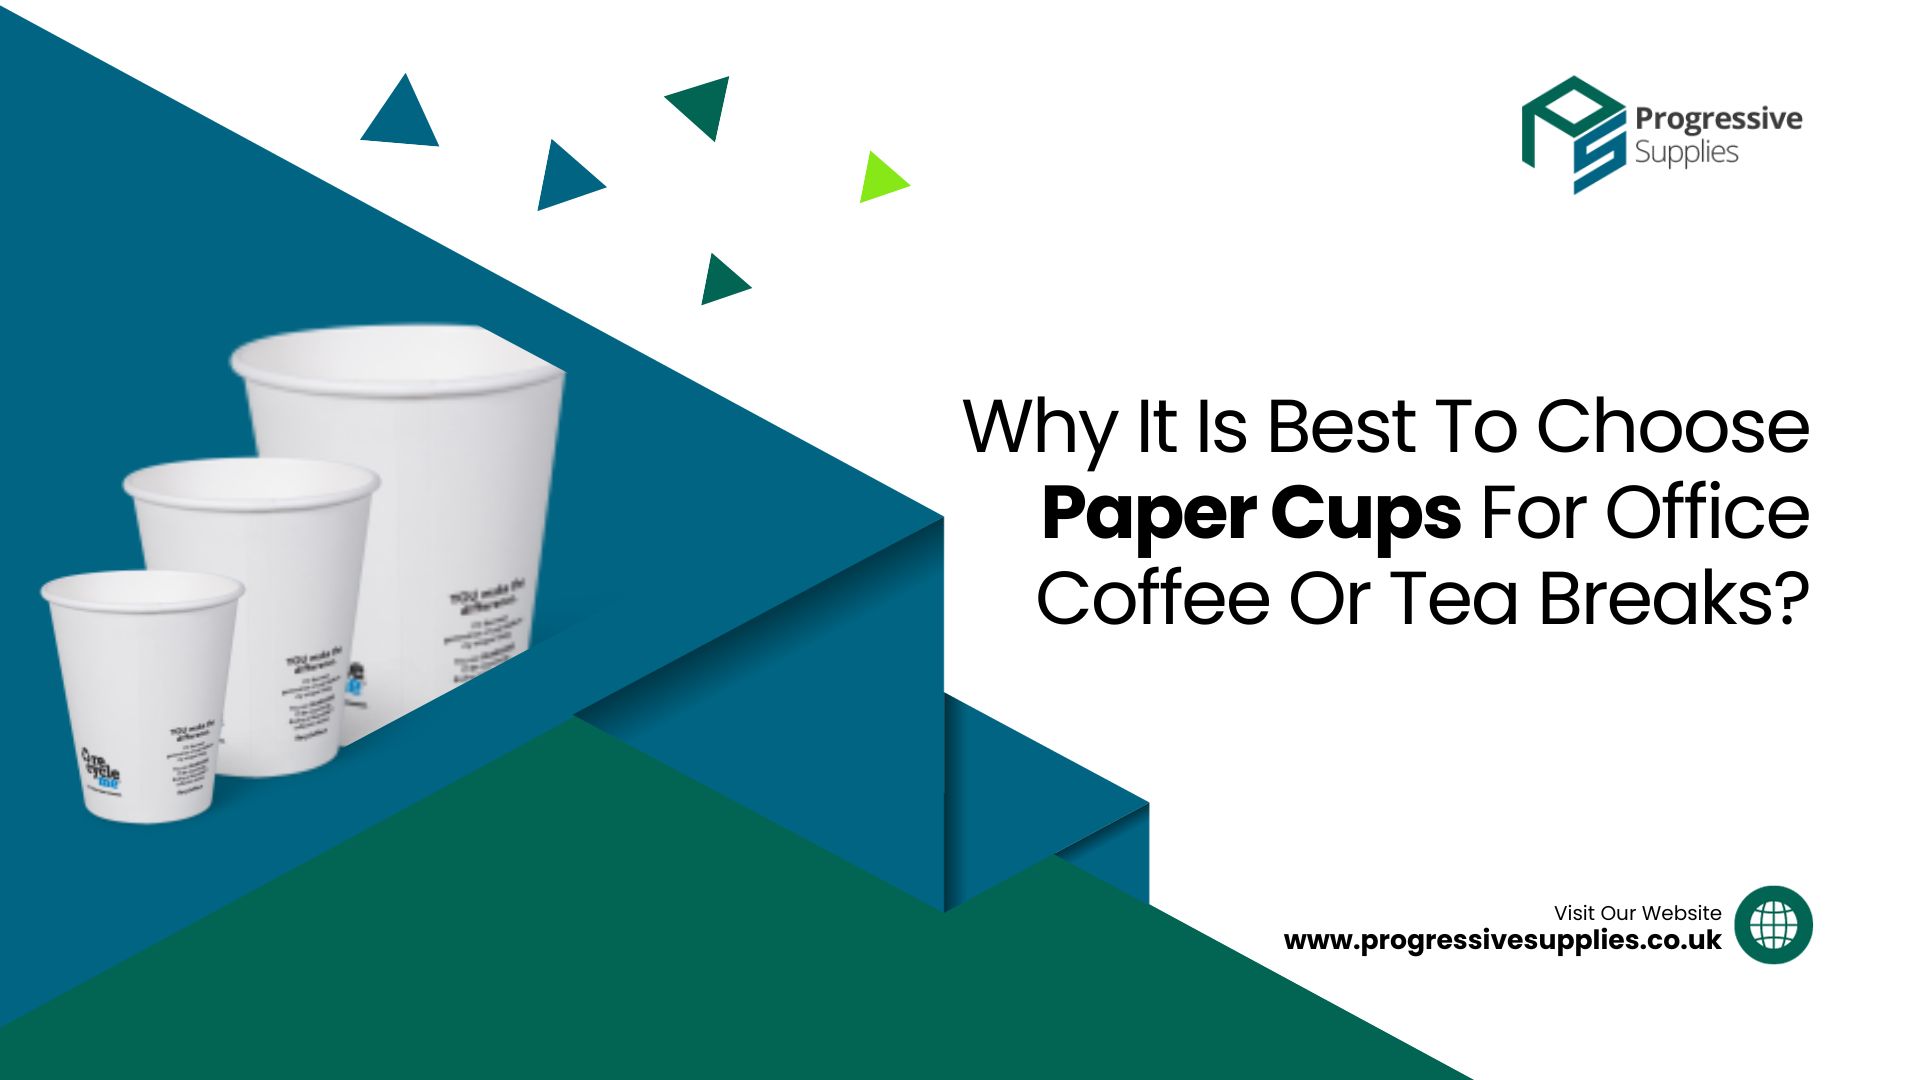 Why It Is Best To Choose Paper Cups For Office Coffee Or Tea Breaks?